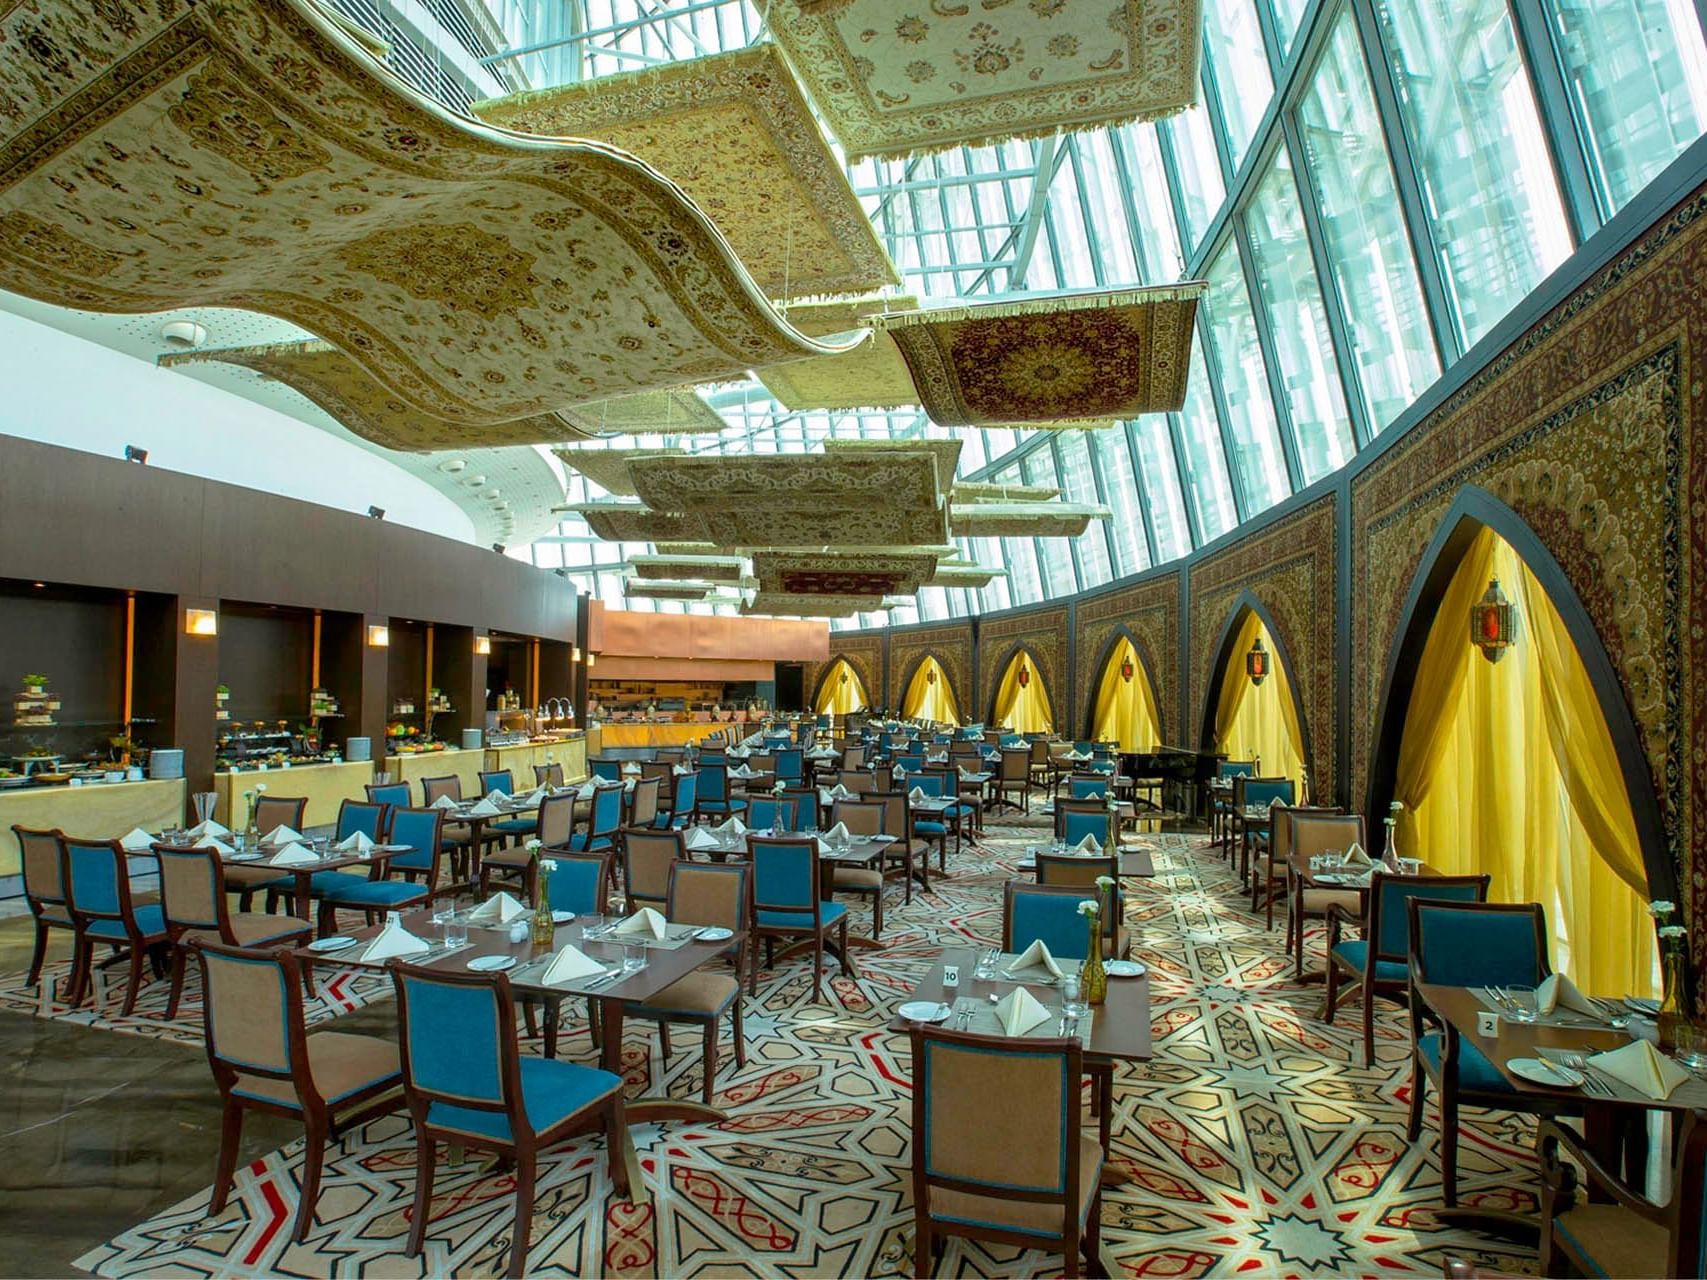 Flying Carpet Restaurant at The Torch Doha Hotel in Qatar